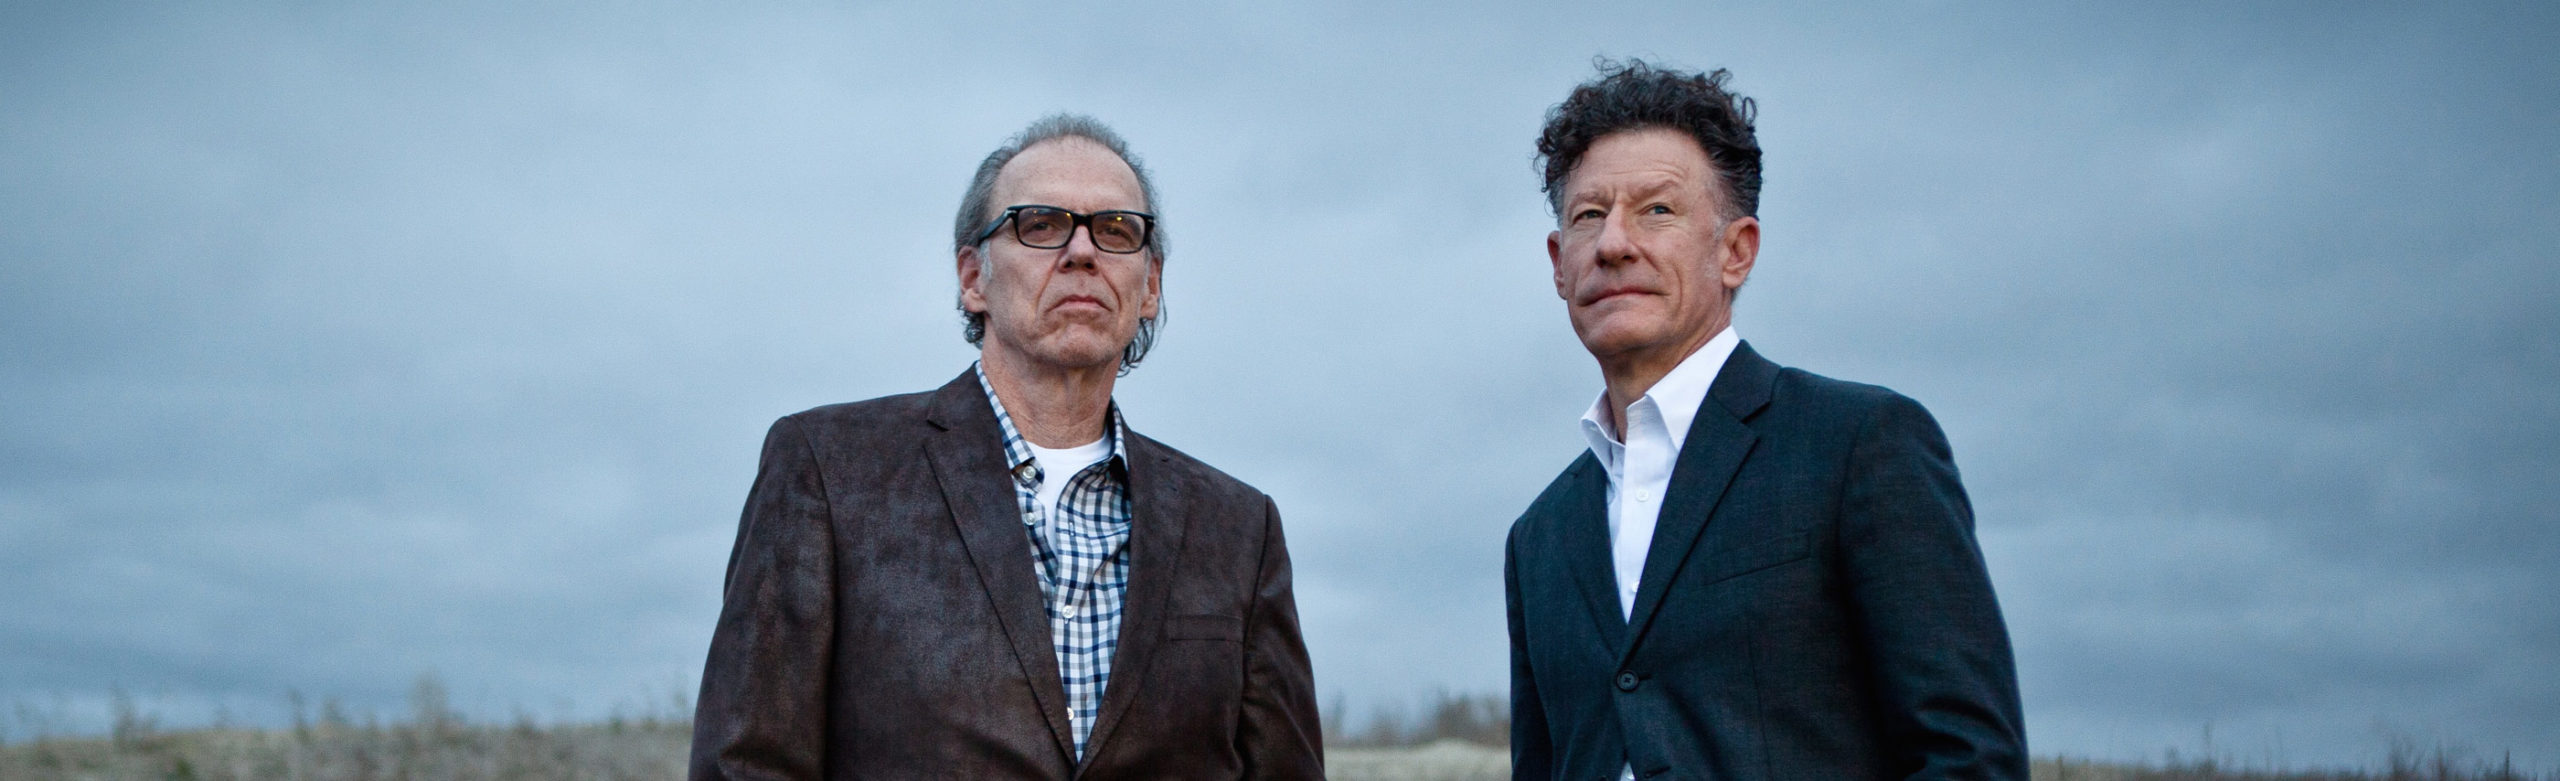 Lyle Lovett and John Hiatt to Perform Special Acoustic Duo Set in Missoula Image